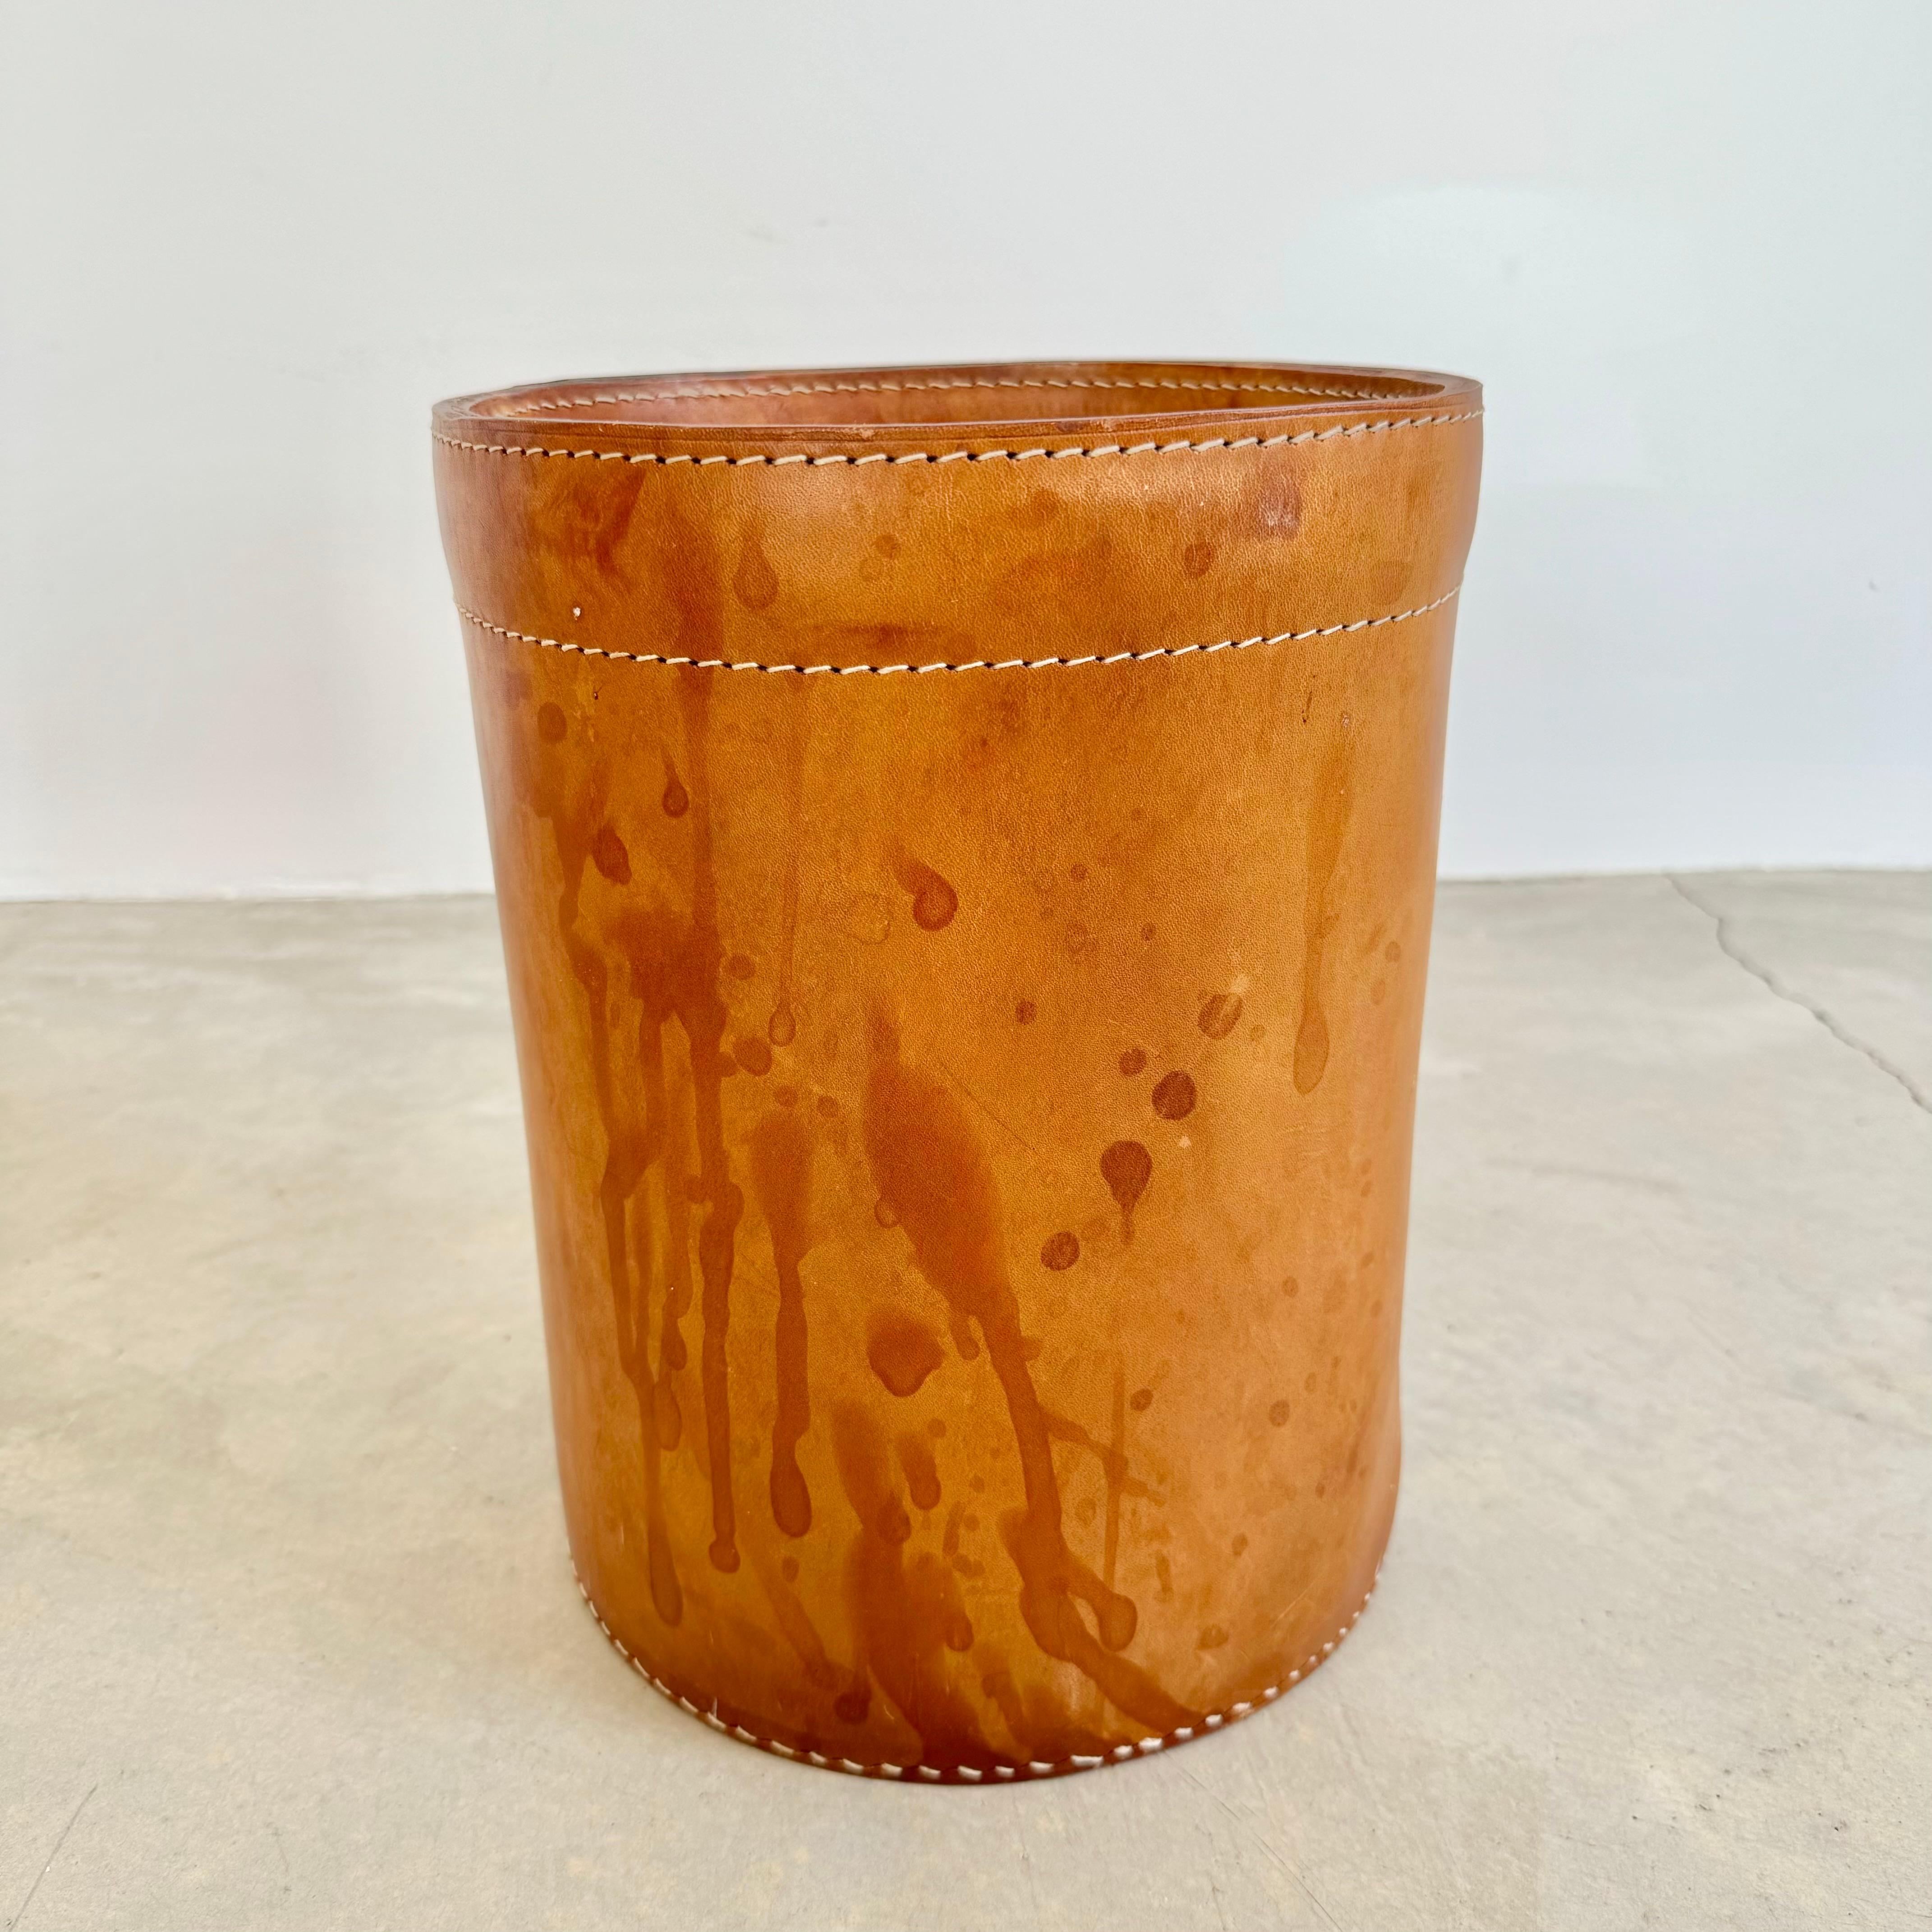 Jacques Adnet Style Saddle Leather Waste Basket, 1950s France For Sale 2